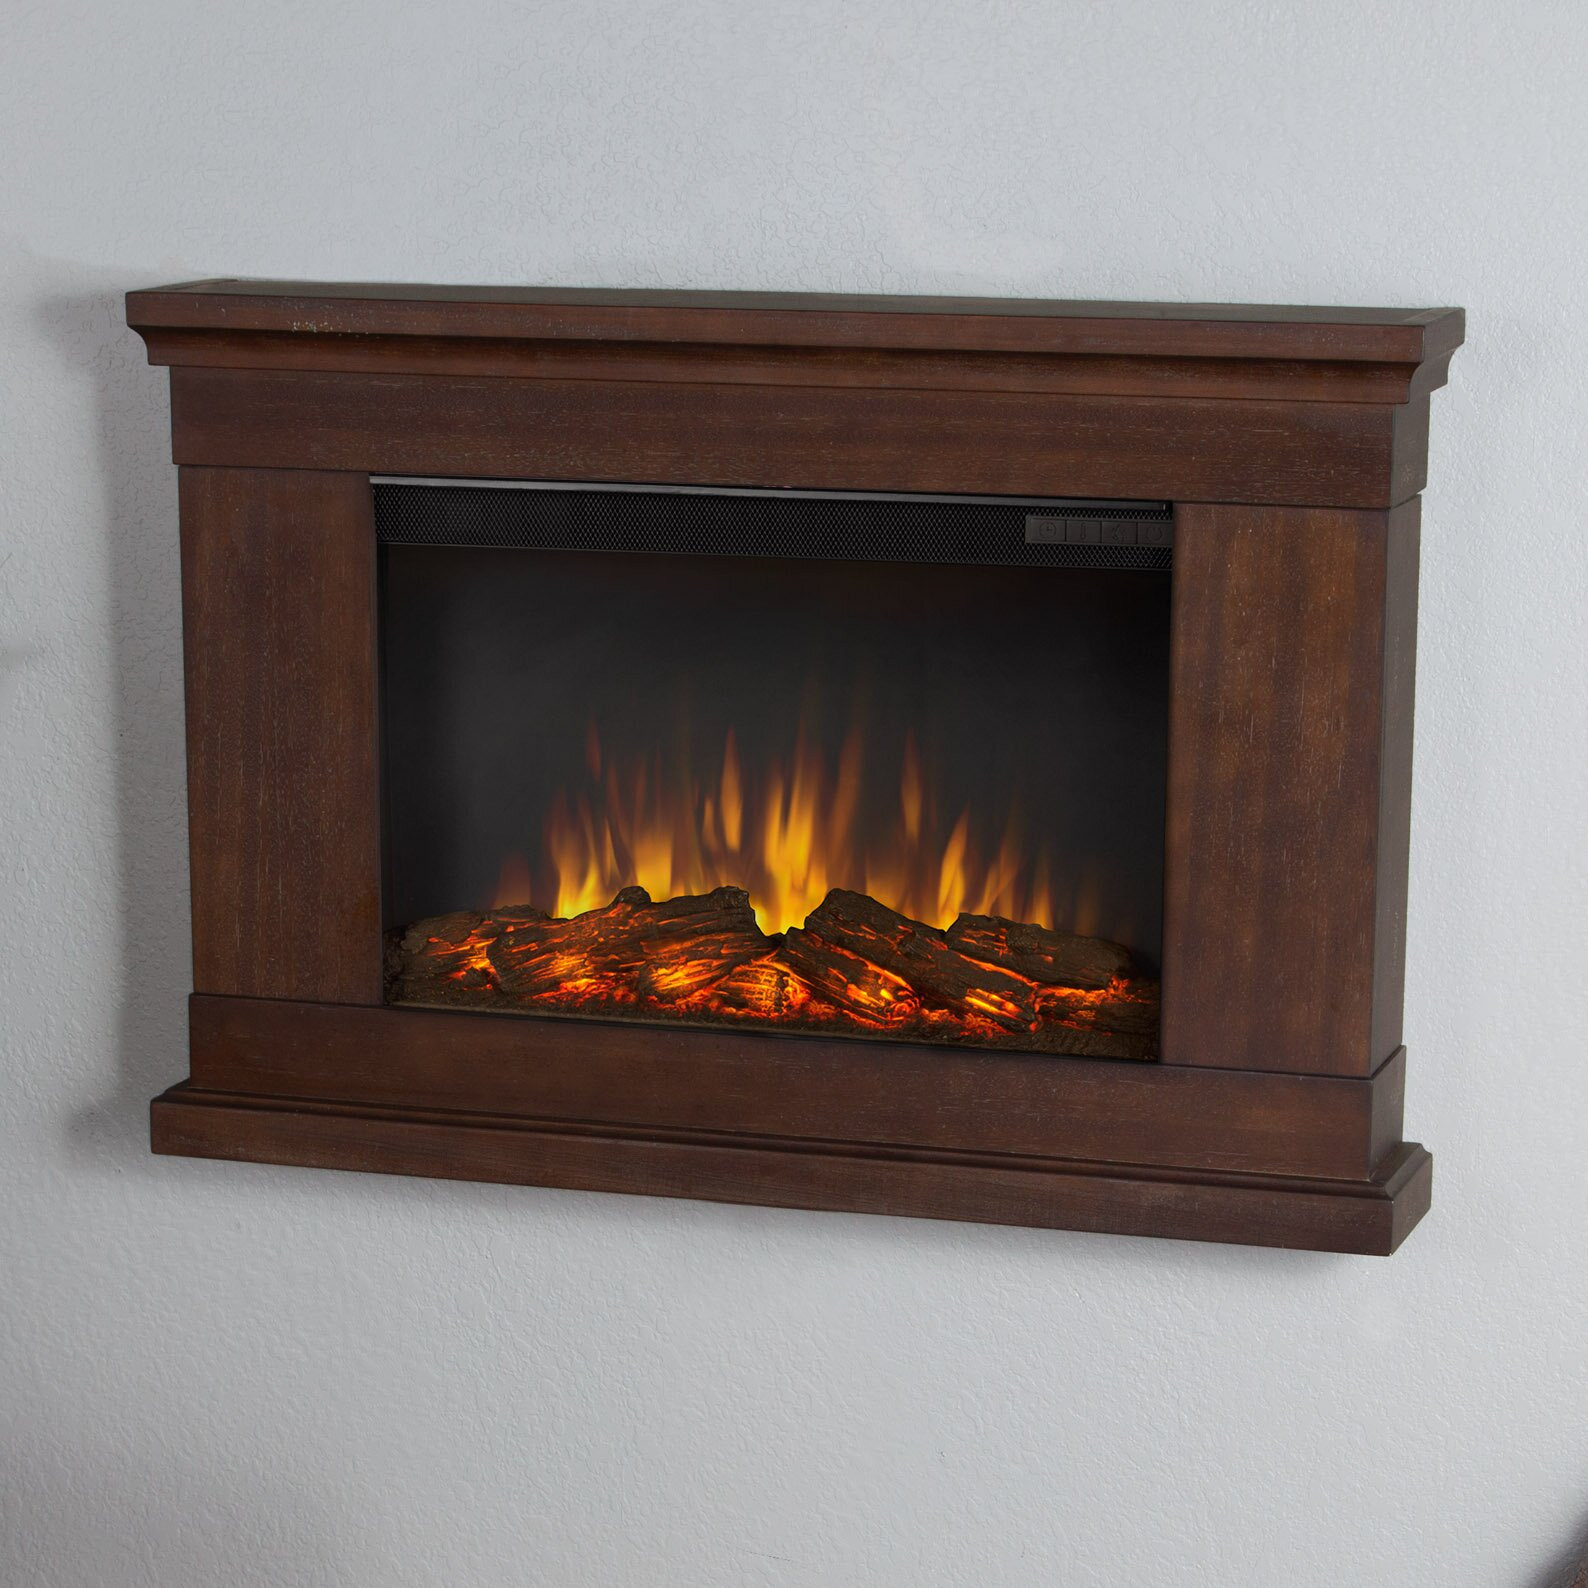 Wall Fireplace Electric
 Real Flame Slim Wall Mount Electric Fireplace & Reviews